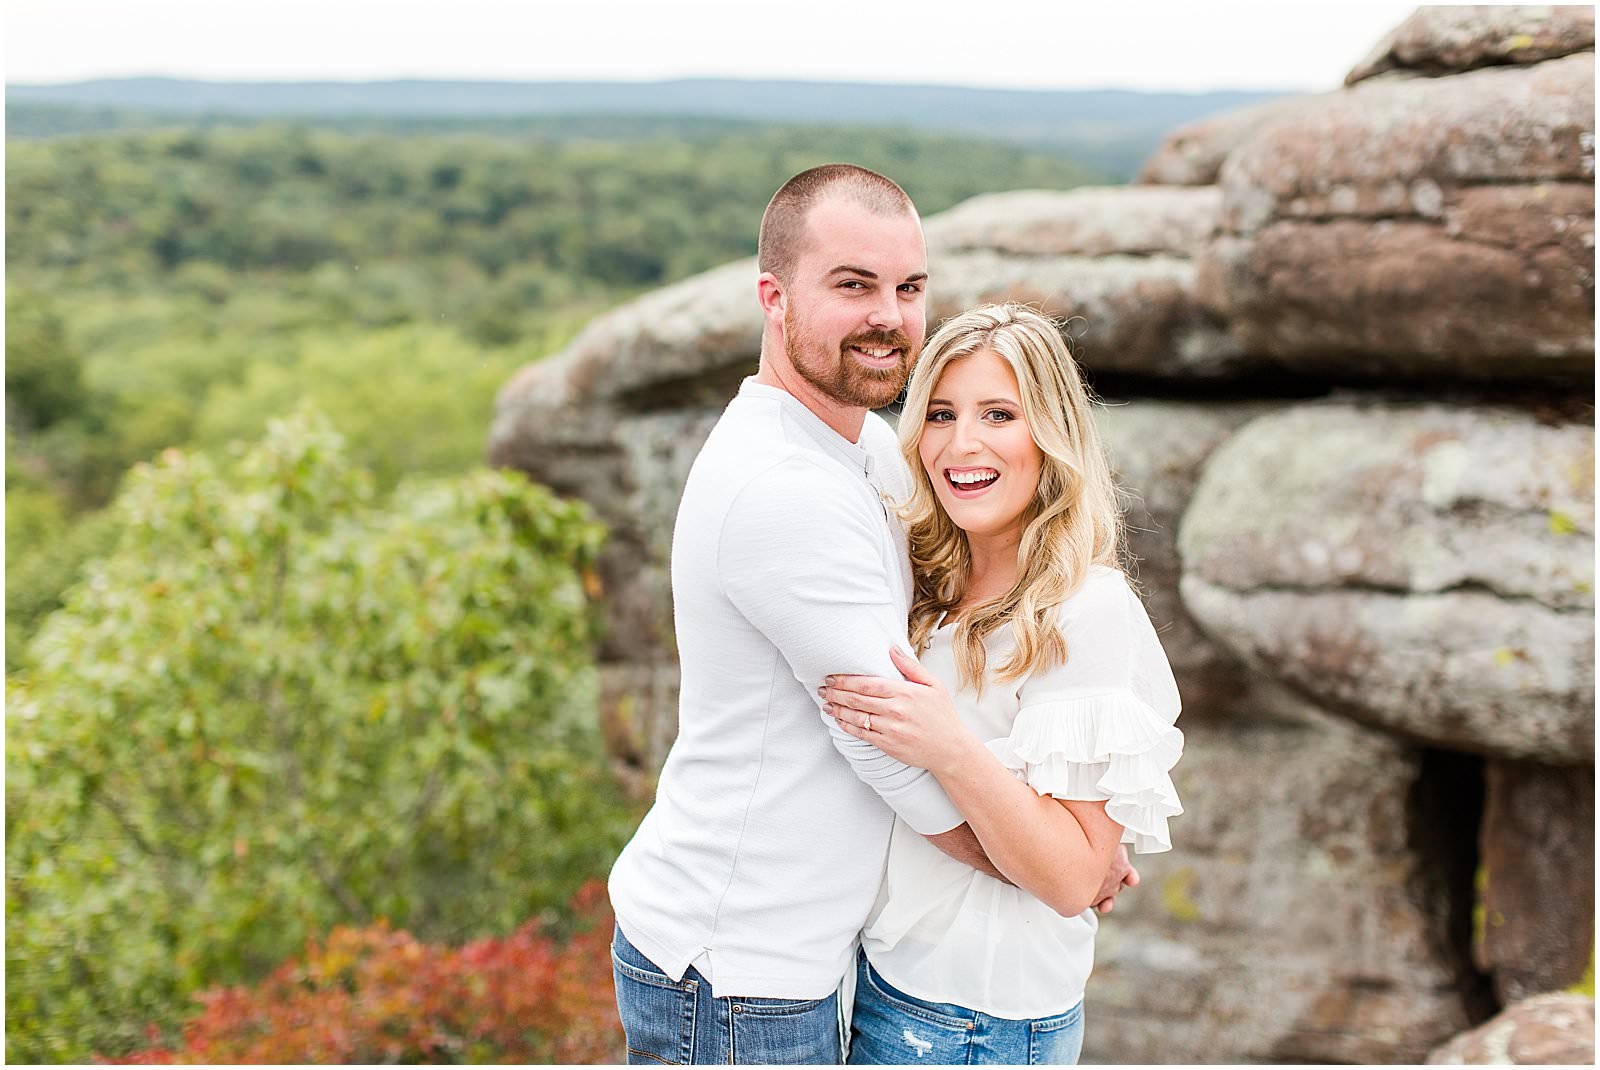 A Garden of the Gods Engagement Session 0003.jpg